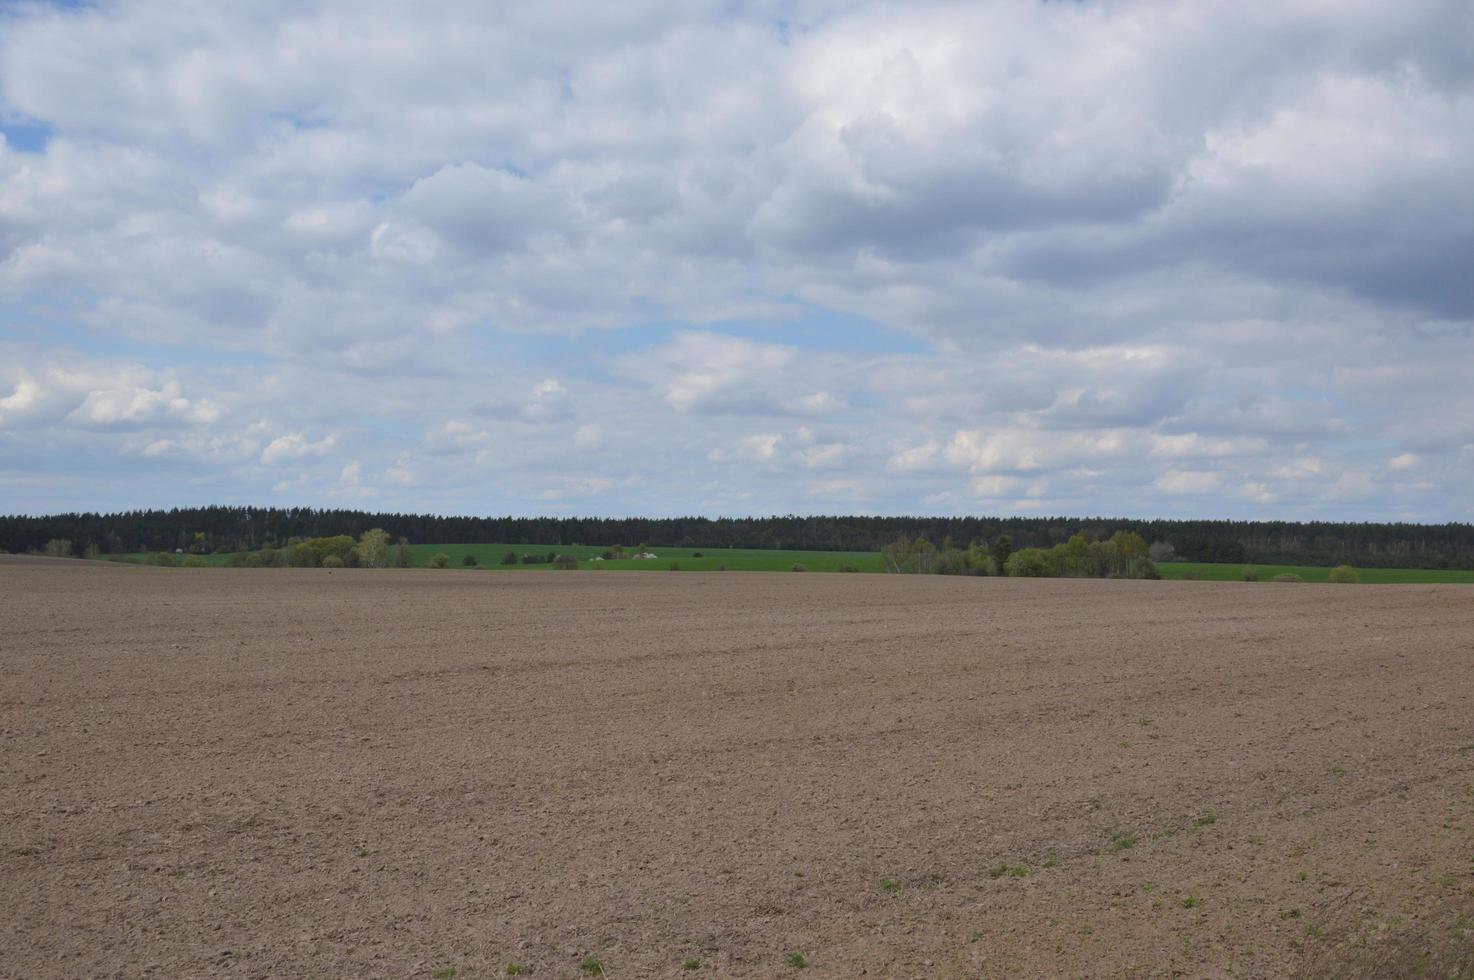 Panorama of a spring field weeded by a tractor photo